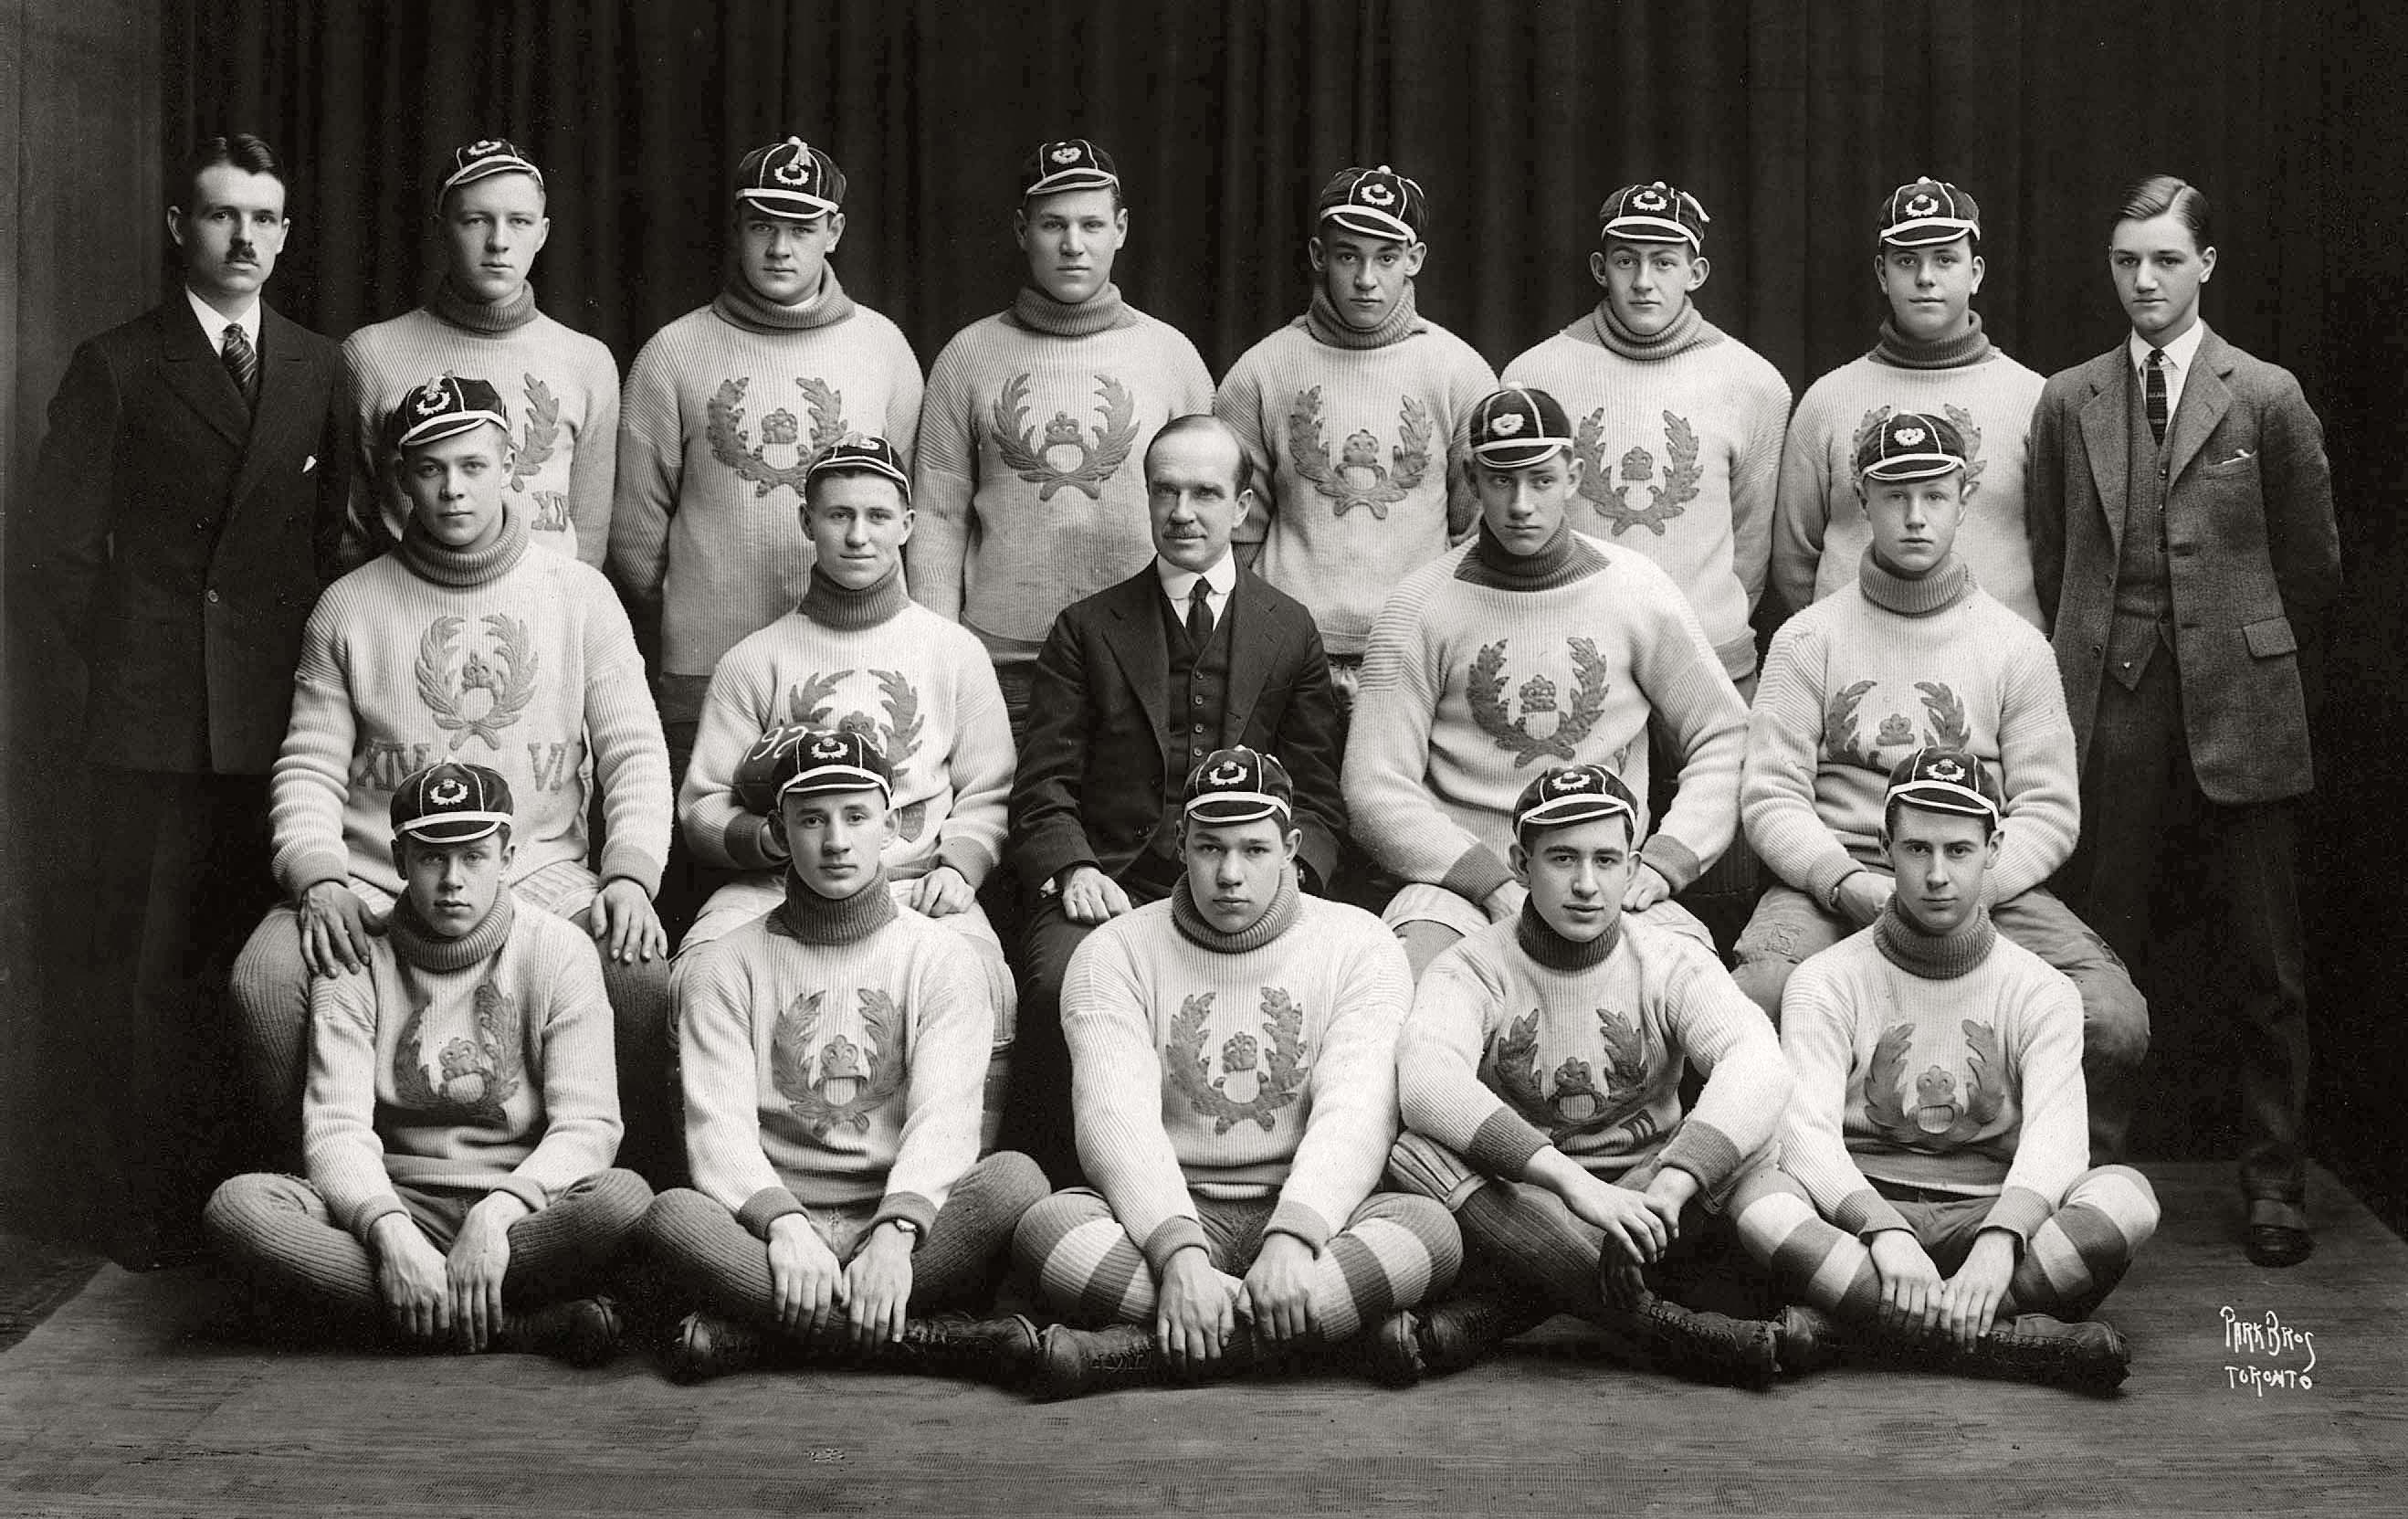 An unknown Canadian soccer Team. Scanned from an 8x10 black and white print. View full size.